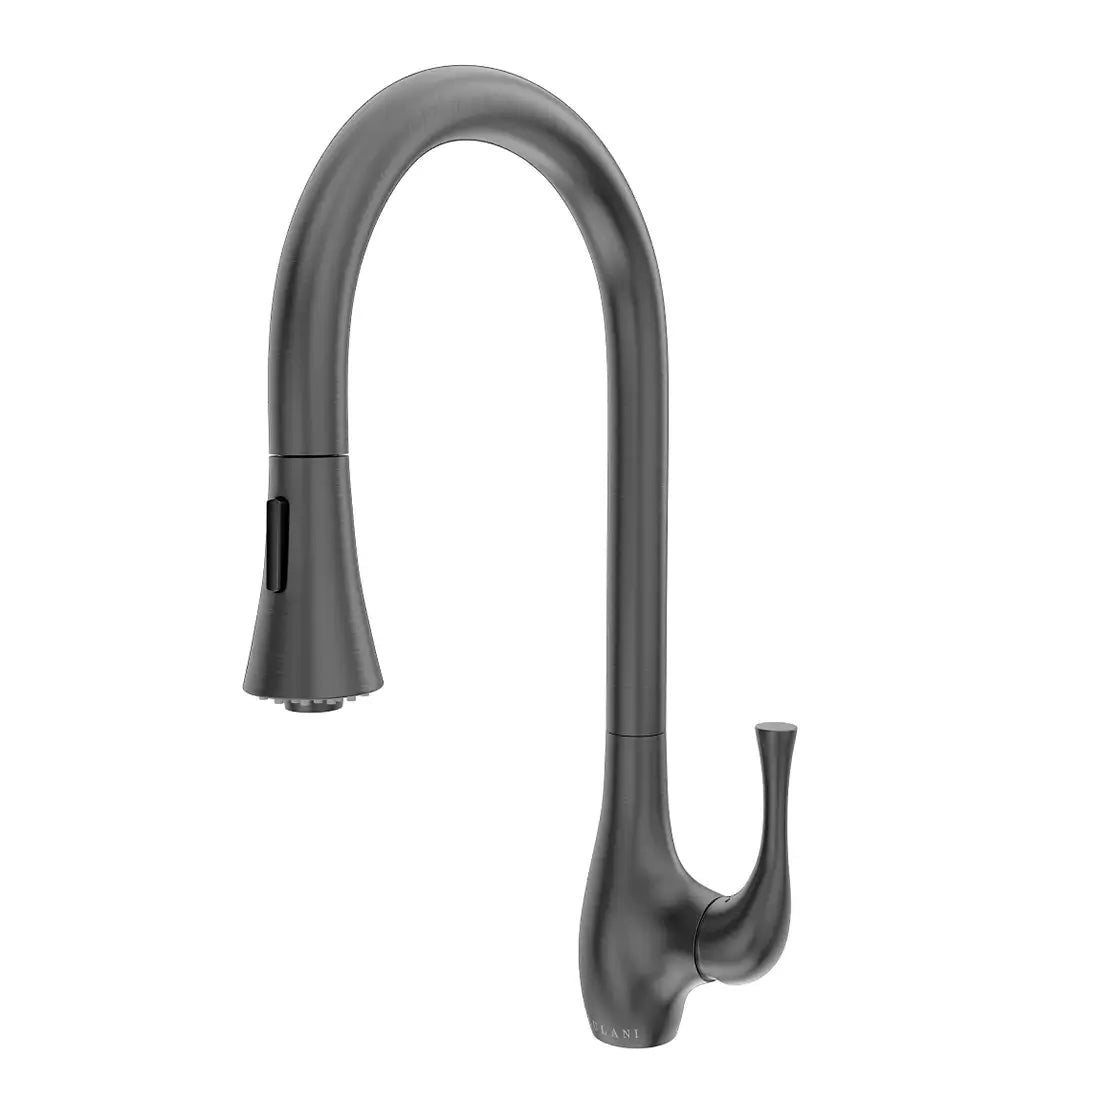 Yasawa - Stainless Steel Pull-Down Kitchen Faucet